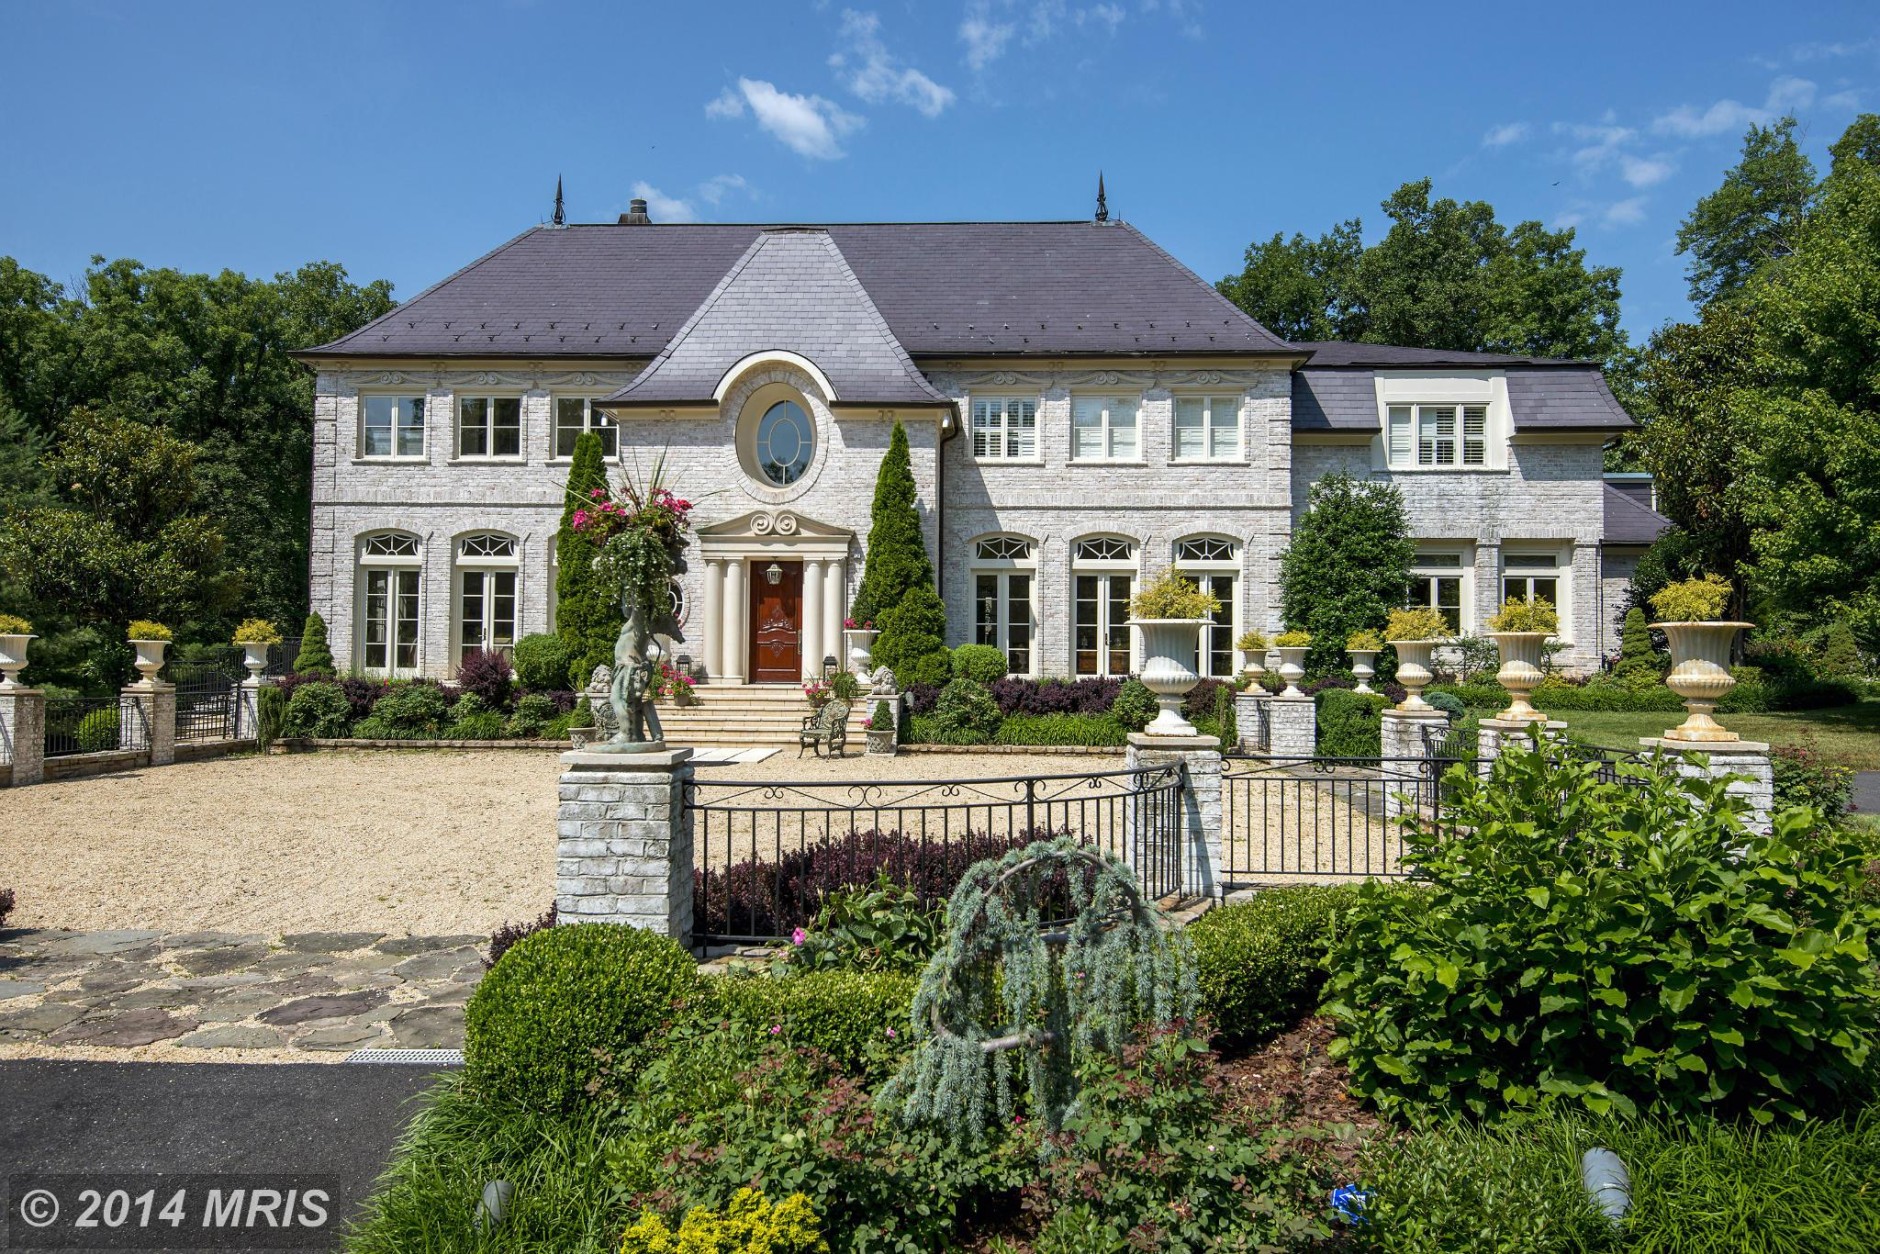 #10. This home, located at 10214 Iron Gate Road, Potomac, Maryland, sold for $5.5 million. (Metropolitan Regional Information Systems, Inc./Metropolitan Regional Information Systems, Inc.)